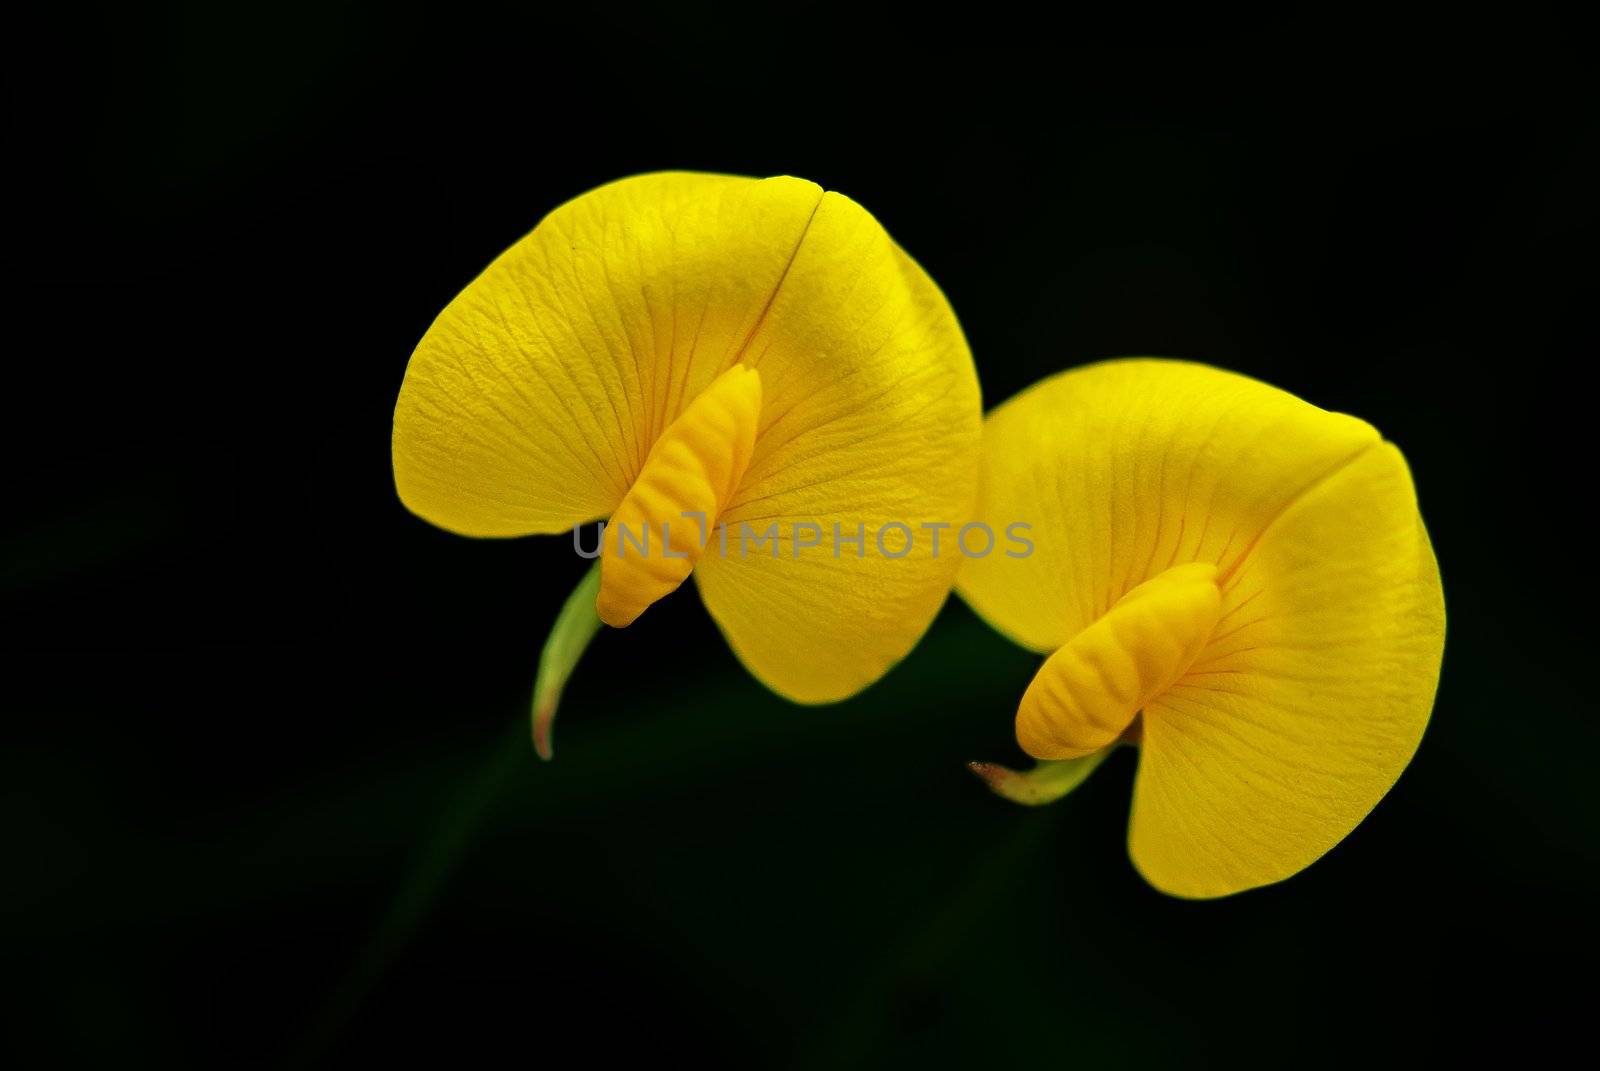 yellow flower - Arachis duranensis by xfdly5